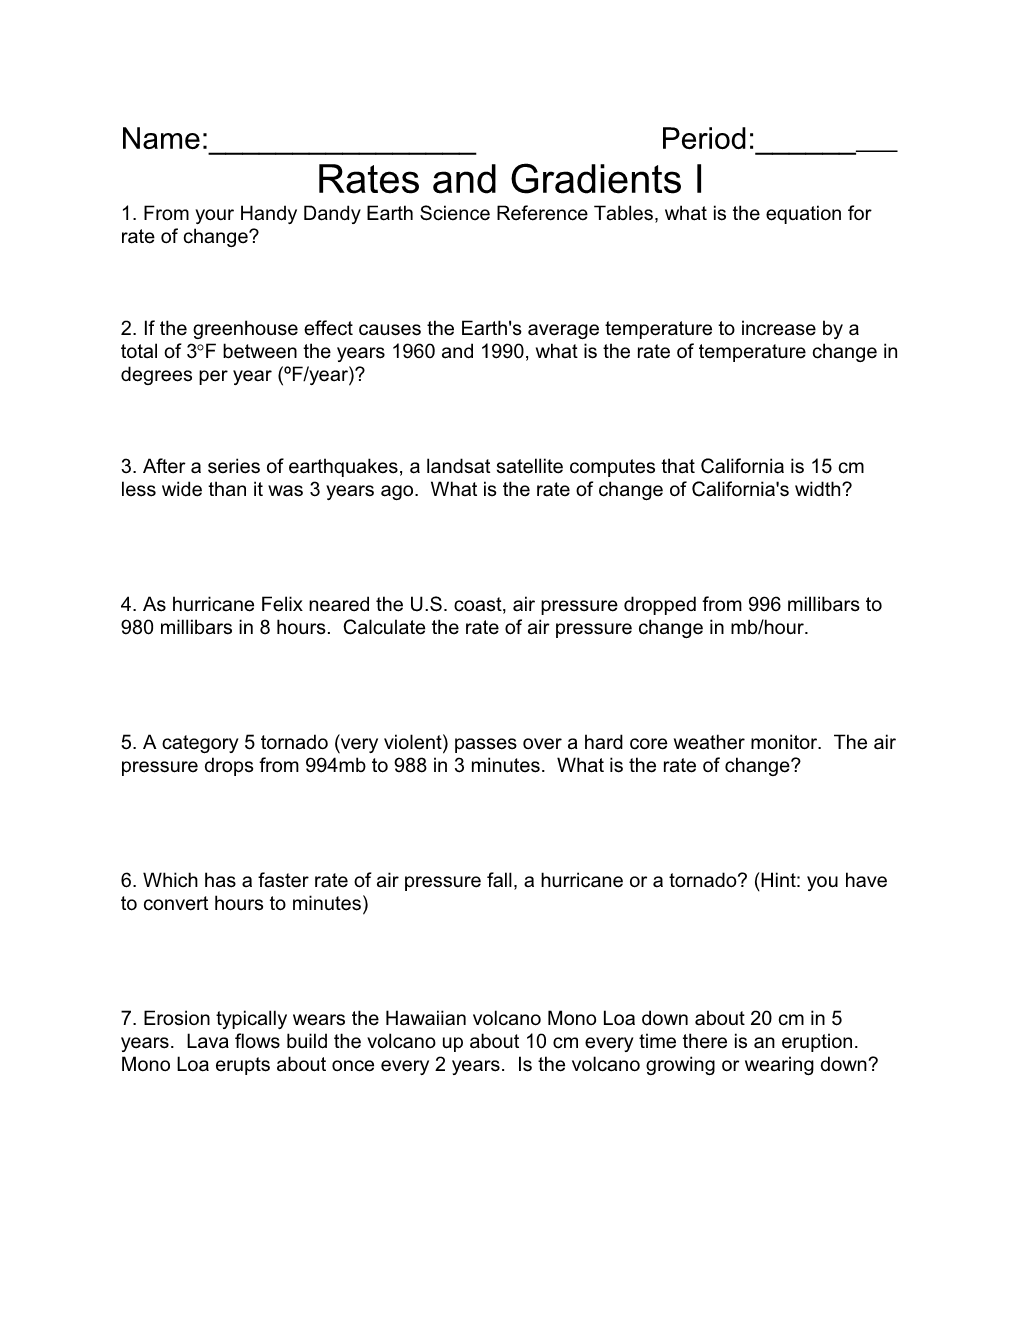 Rates and Gradients I